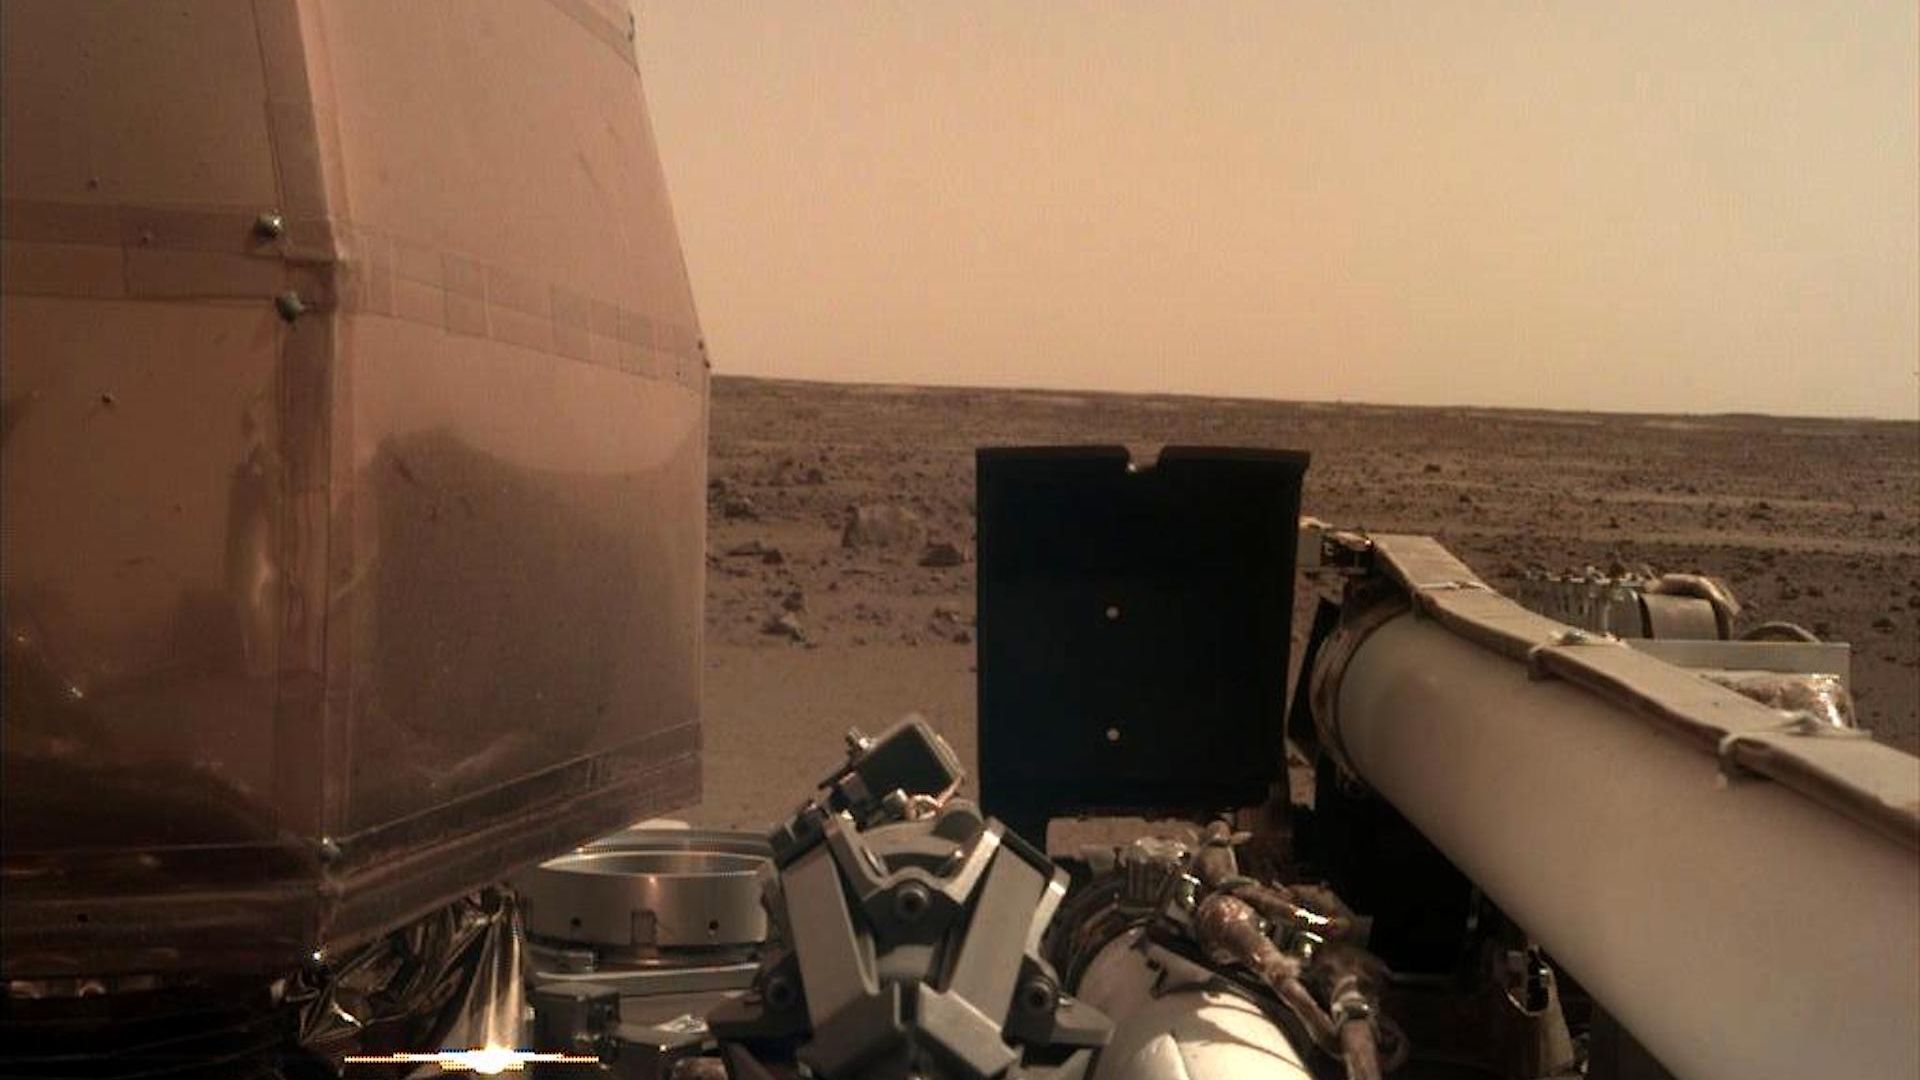 The Instrument Deployment Camera, located on the robotic arm of NASA's InSight lander, took this picture of the Martian surface on Nov. 26.